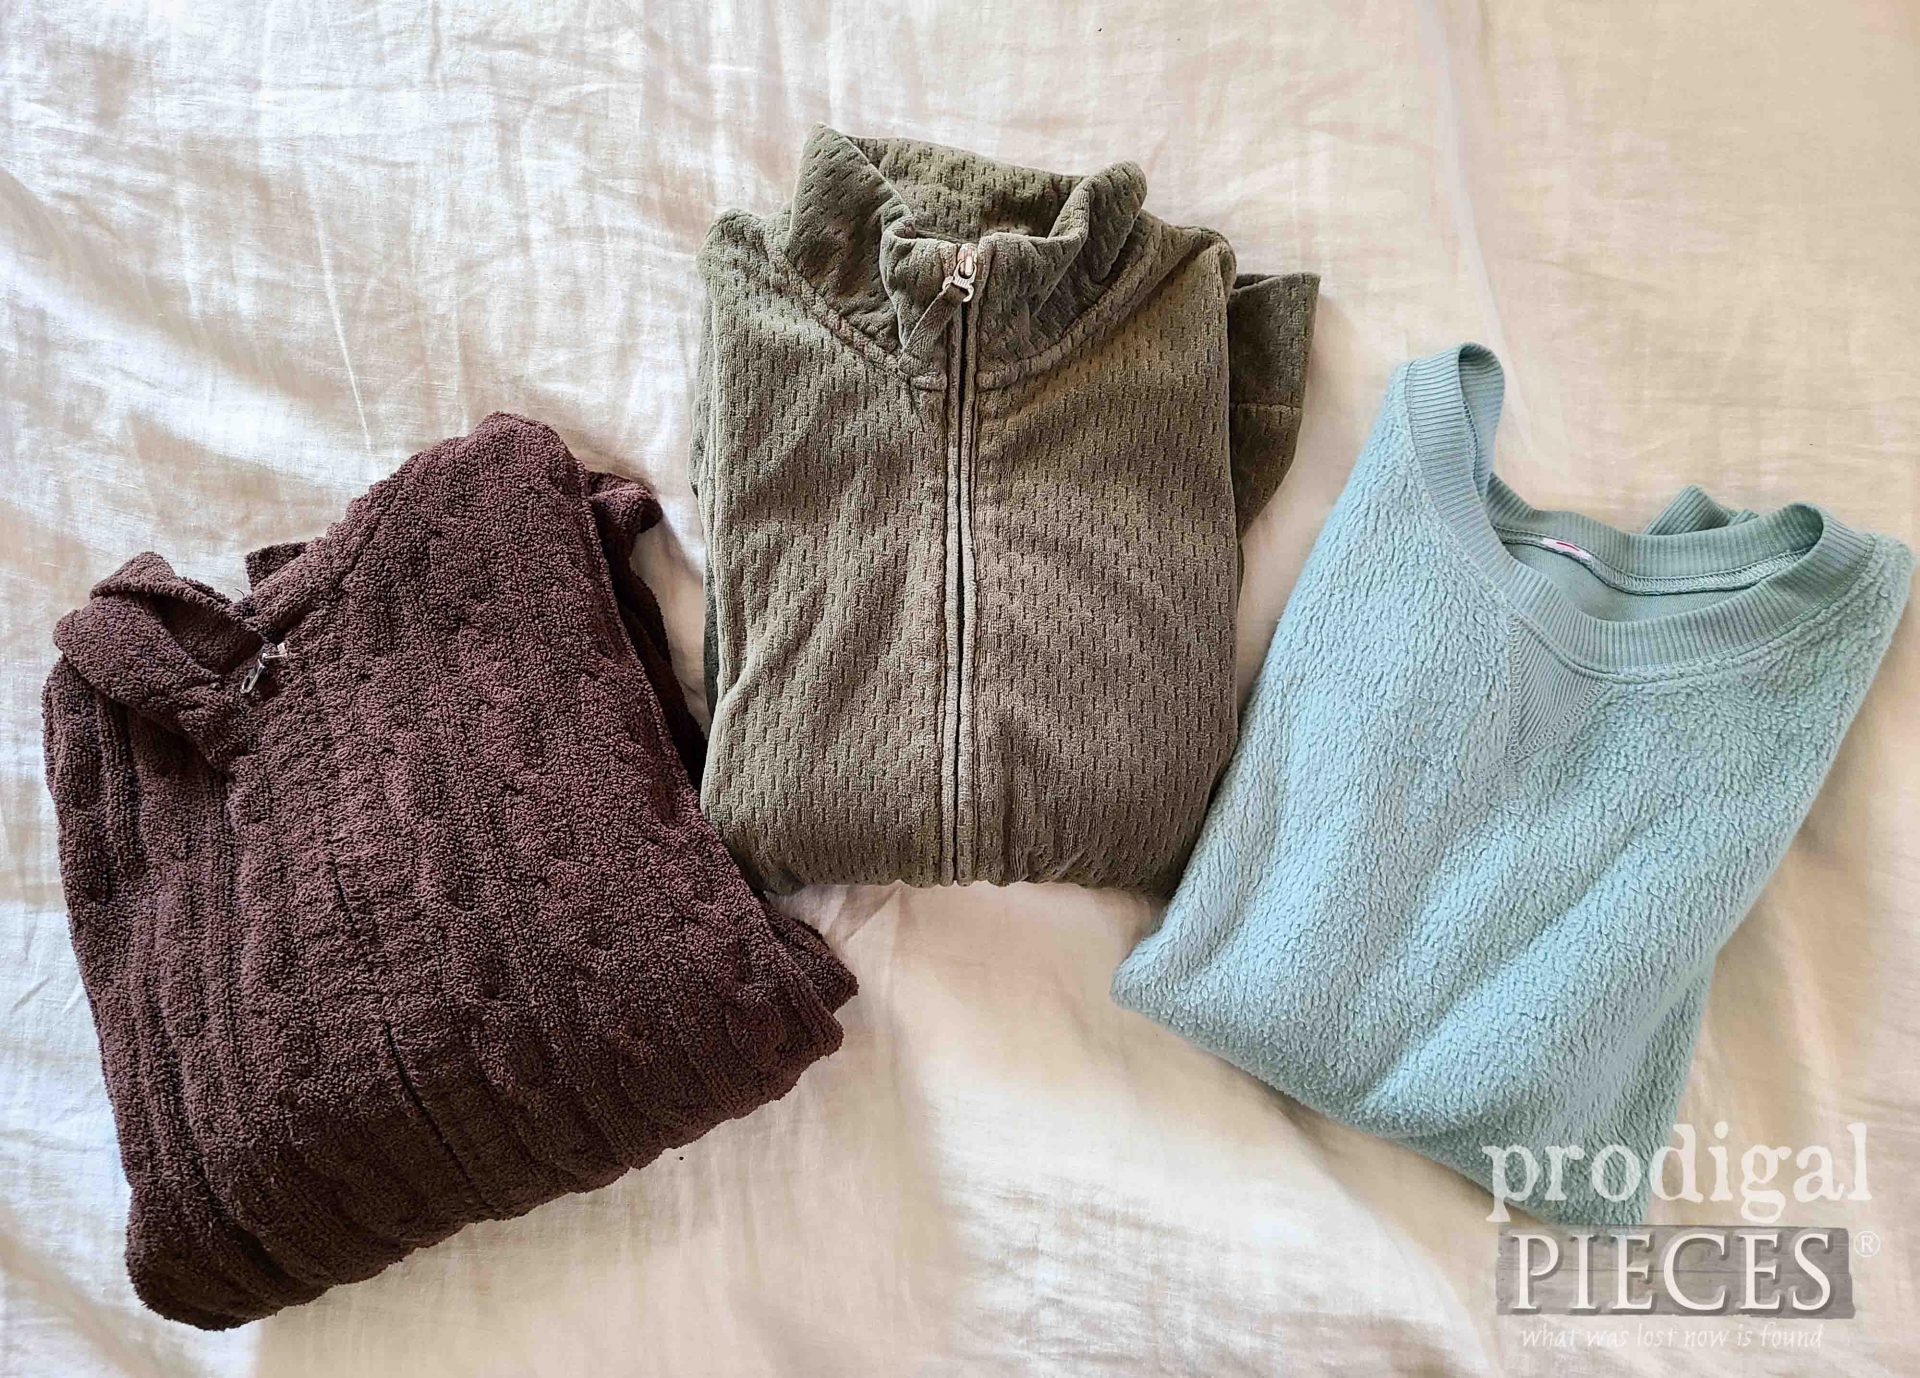 Thrifted Sweaters Before Refashion Fun | prodigalpieces.com